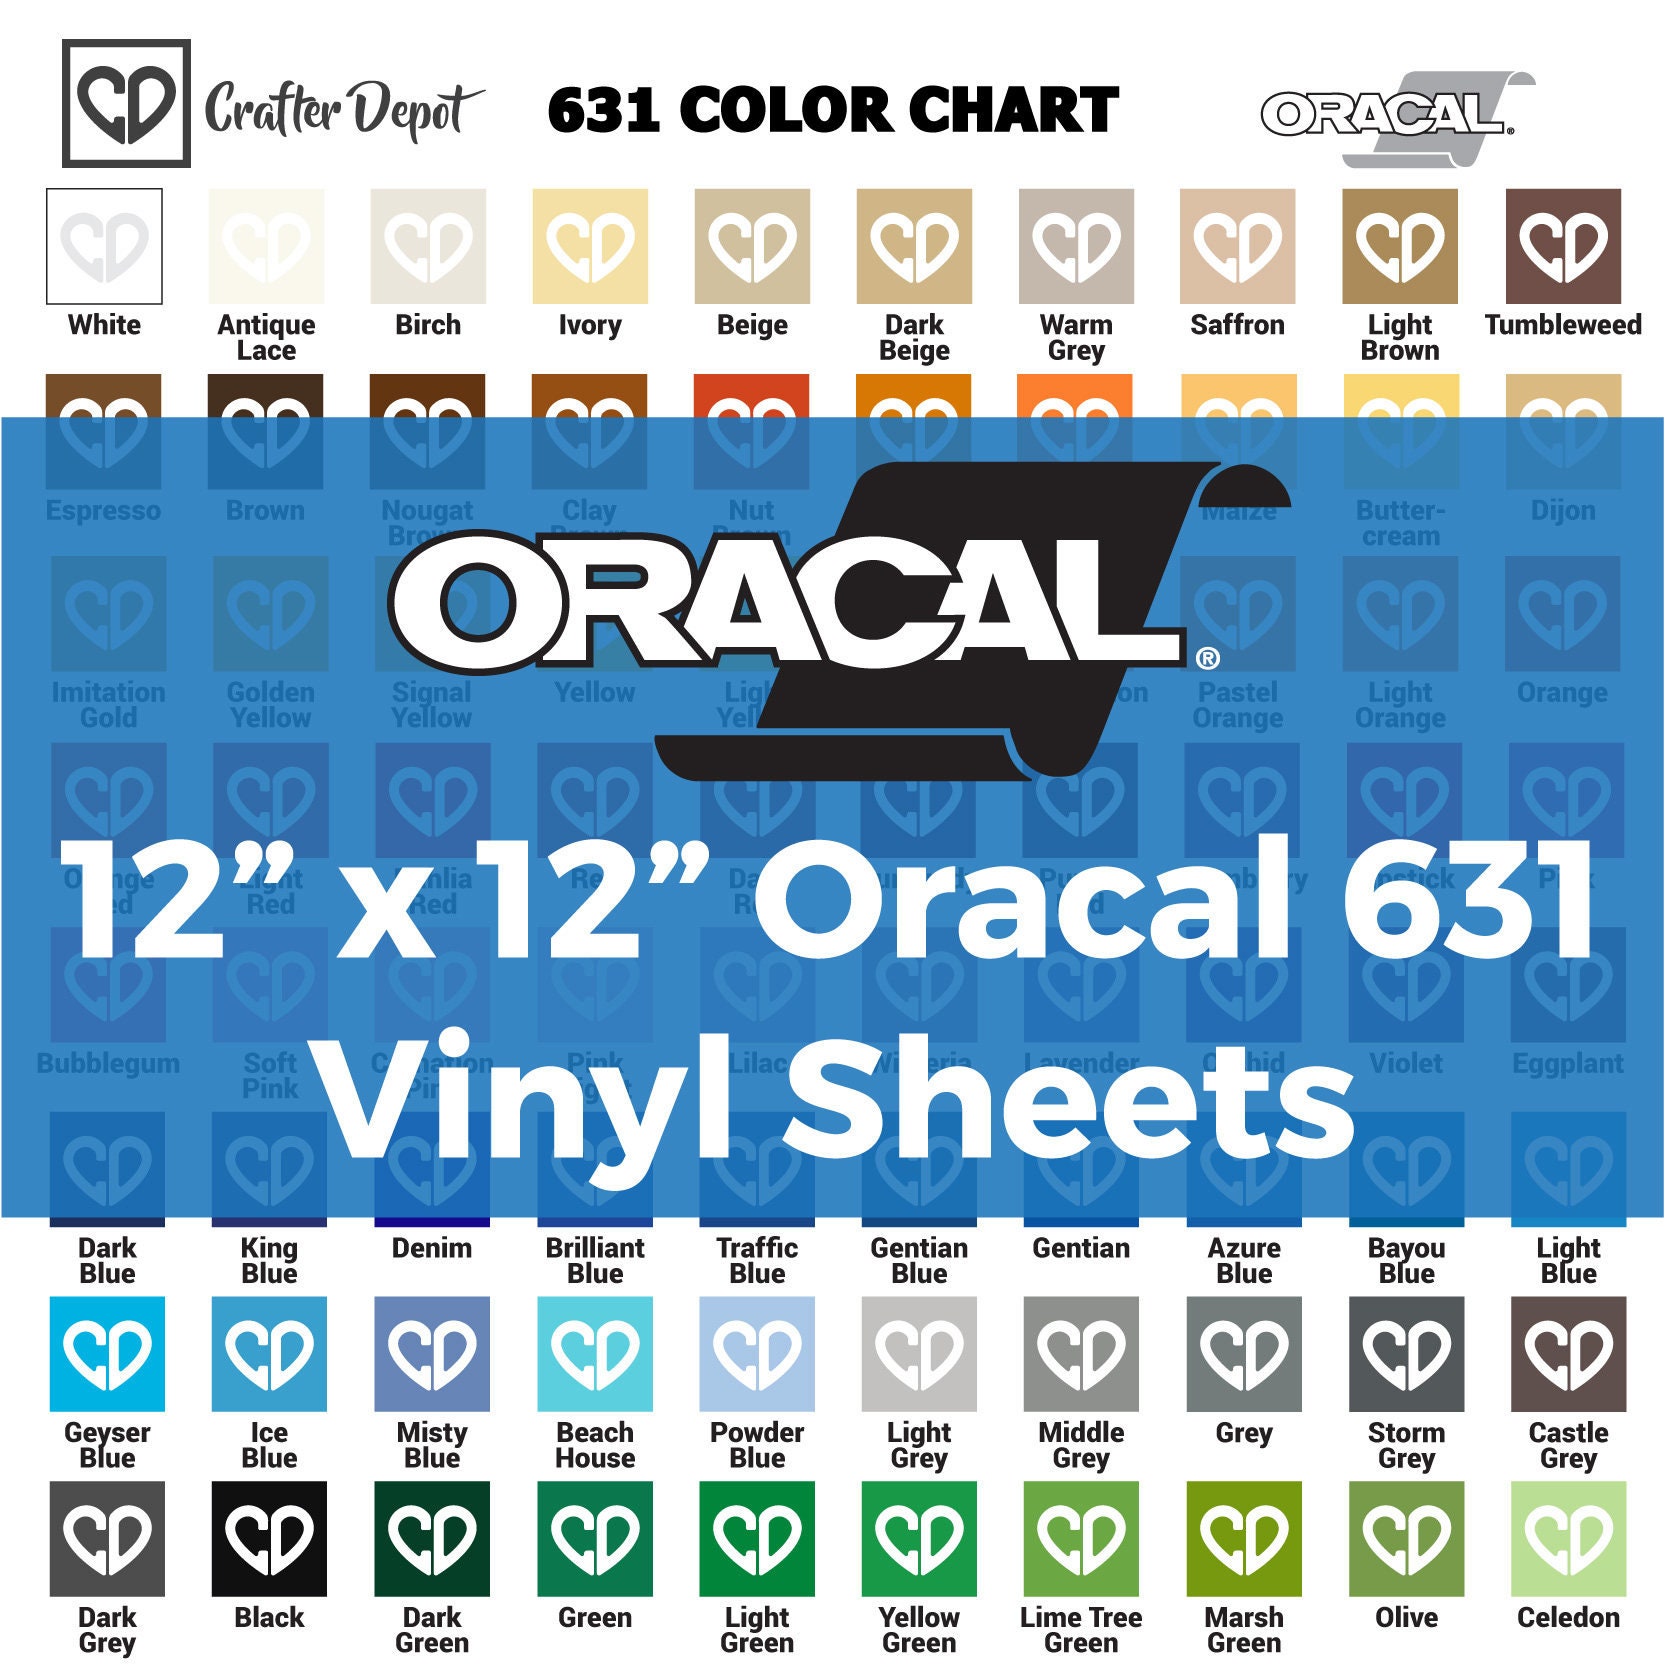 12 x 30' Oracal 651 gloss white (010) adhesive vinyl/vinyl for hobby and  craft cutters/sign vinyl